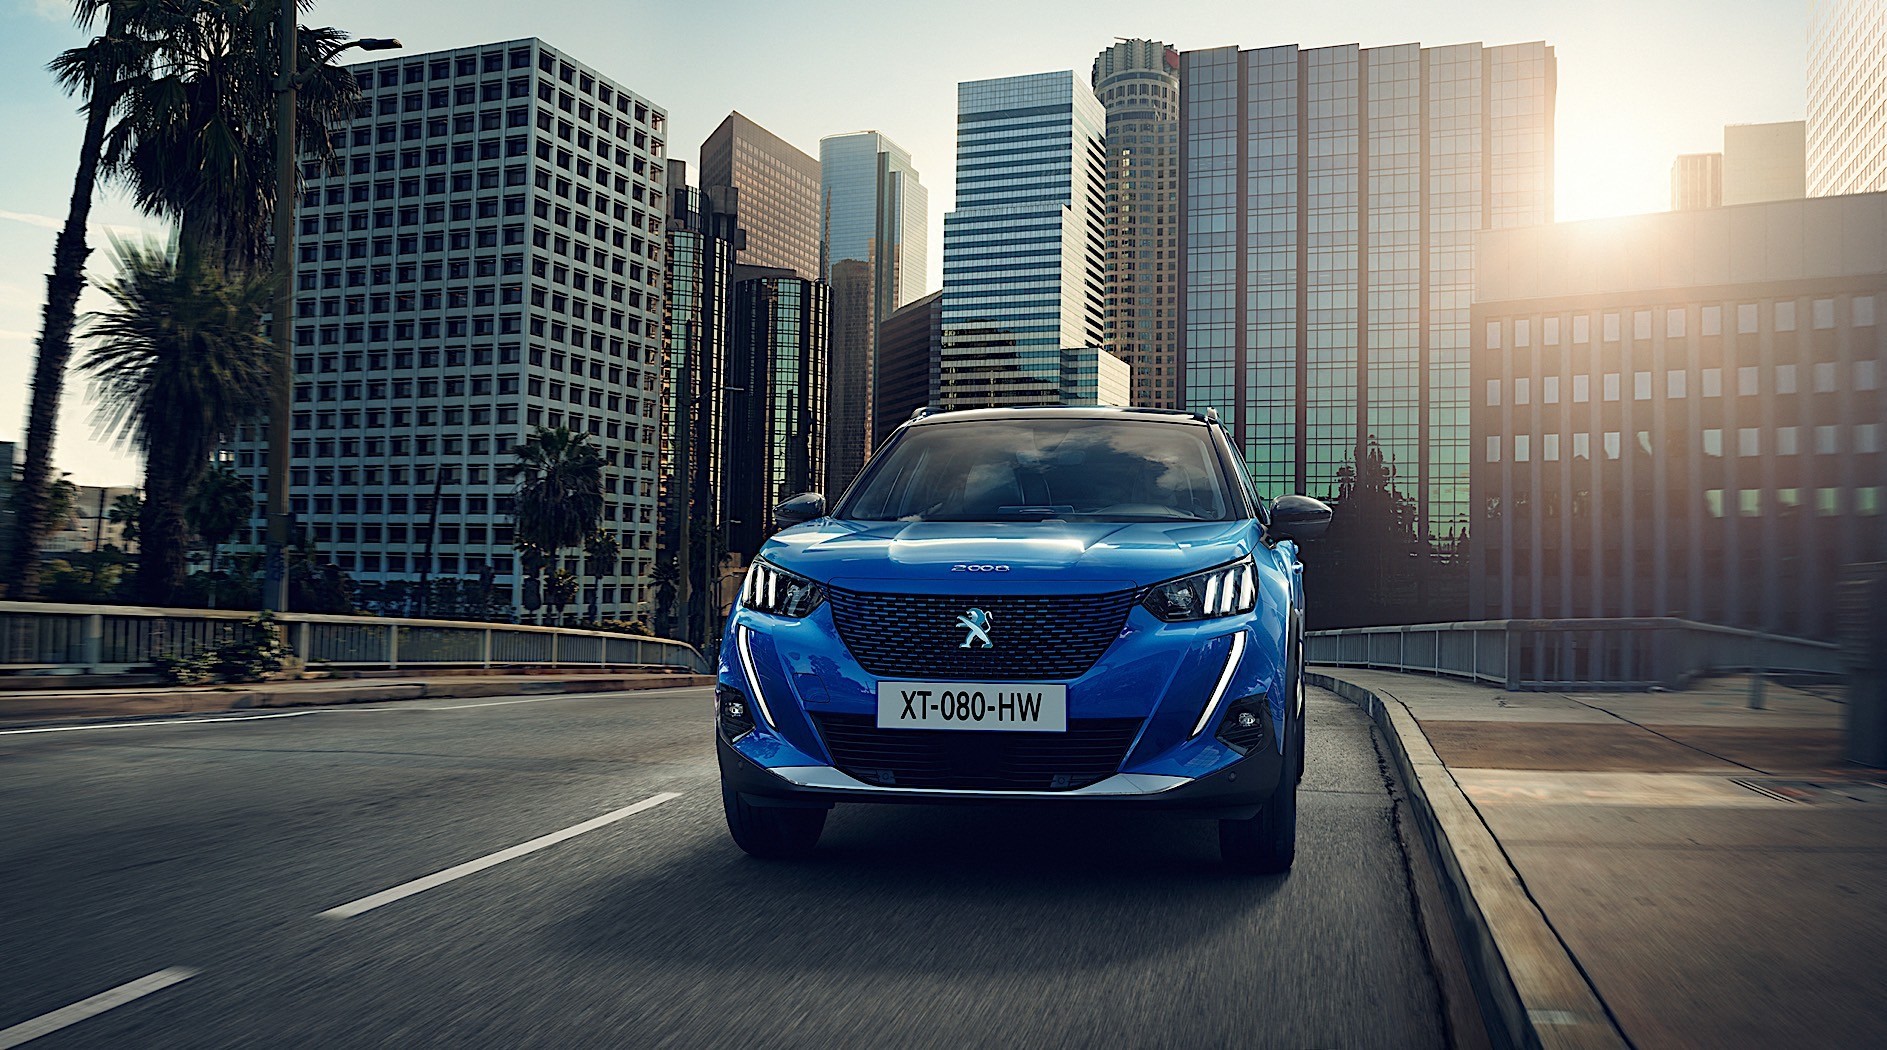 2020 Peugeot 2008 Revealed with Electric Drive and Holographic HUD